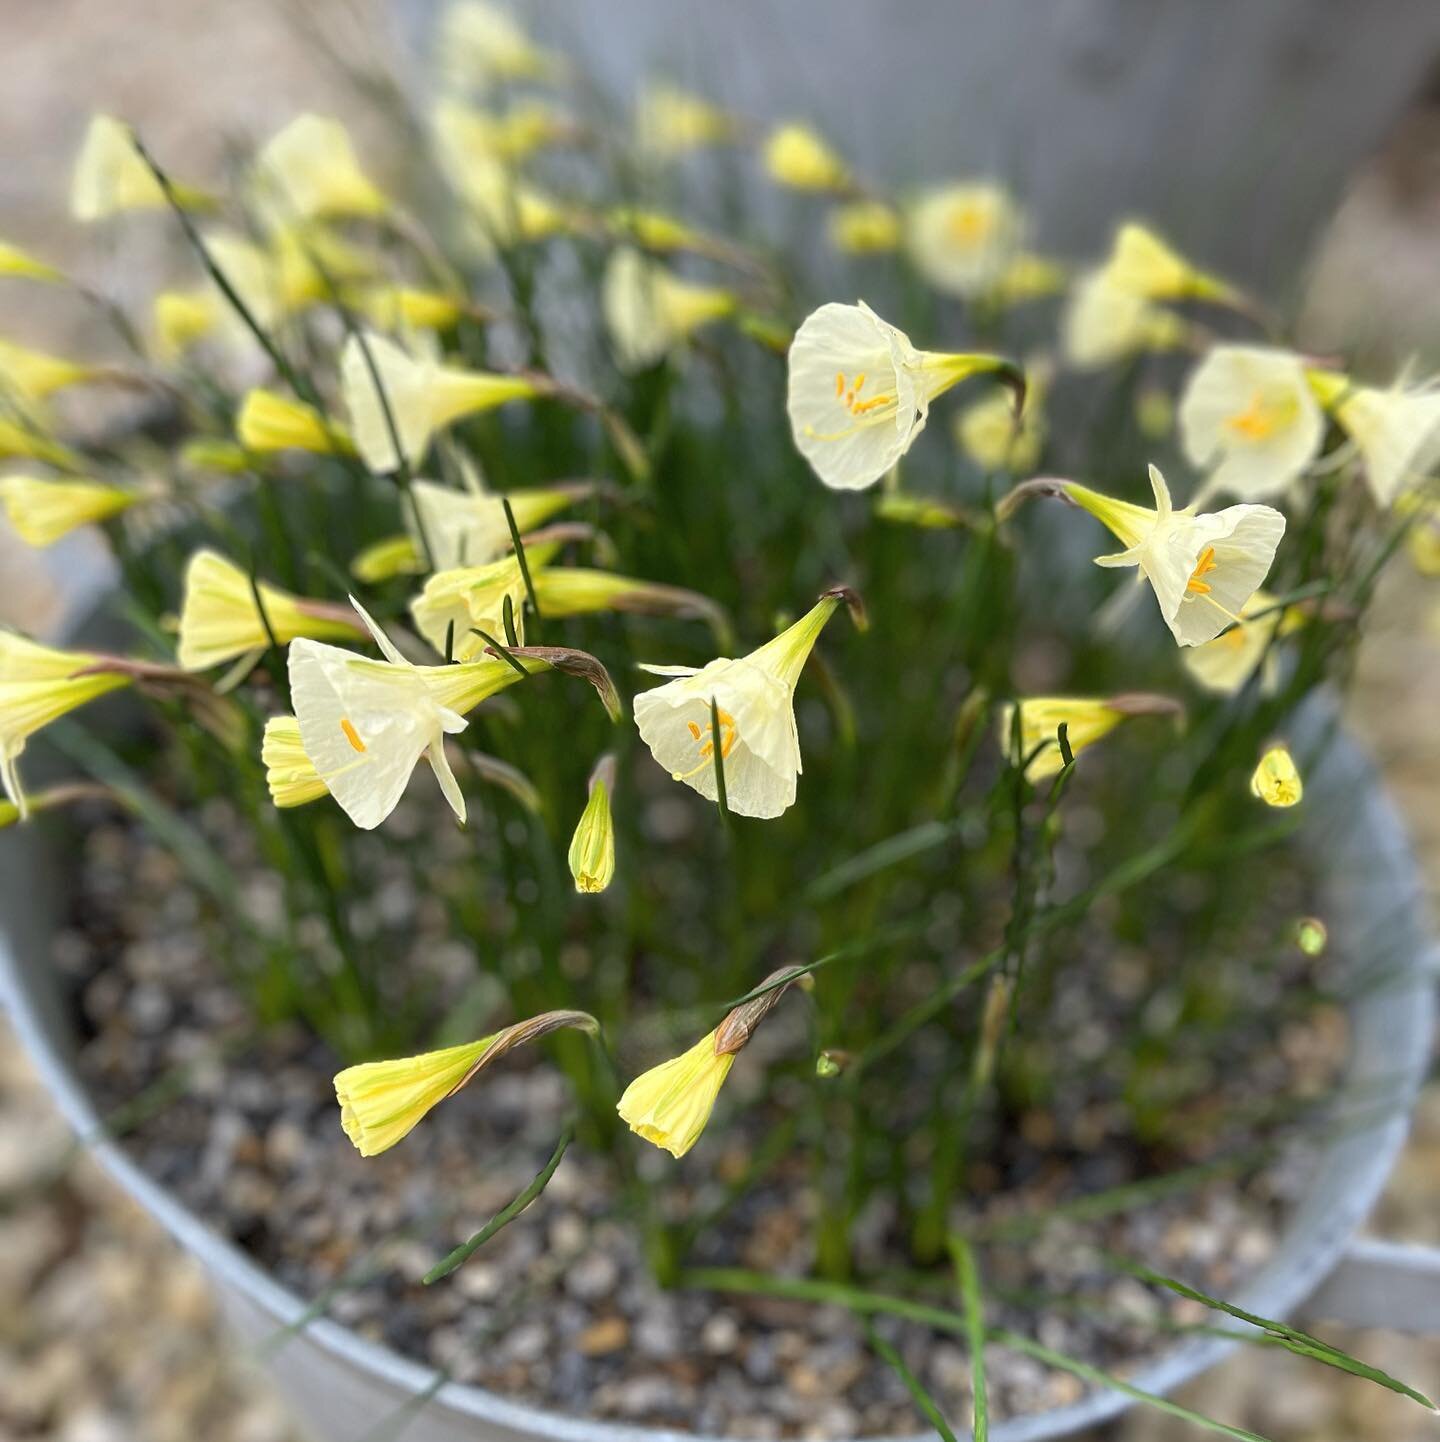 Signs of Spring&hellip; pots of pretty petticoats 
Narcissus bulbocodium &lsquo;Arctic bells&rsquo; almost fully open, such a welcome sight for the weekend.  I love all the seasons but you cannot help but feel &lsquo;at last&rsquo;!
.
.
.
.
.
.
.
.
#